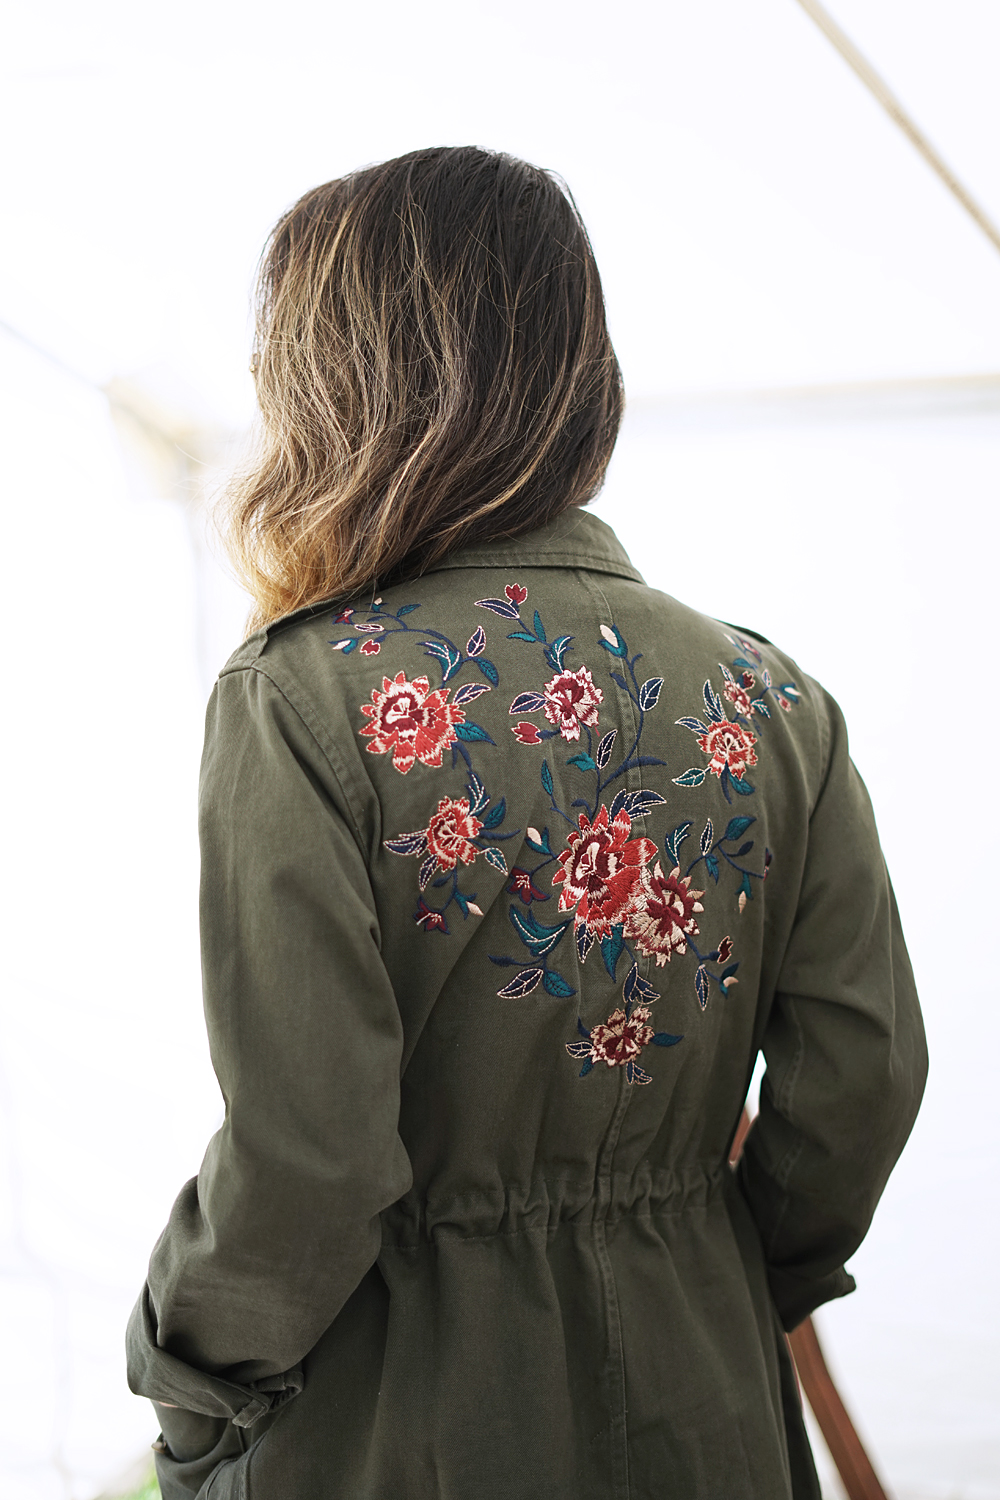 07campari-sunsetmag-camping-sf-style-floral-embroidery